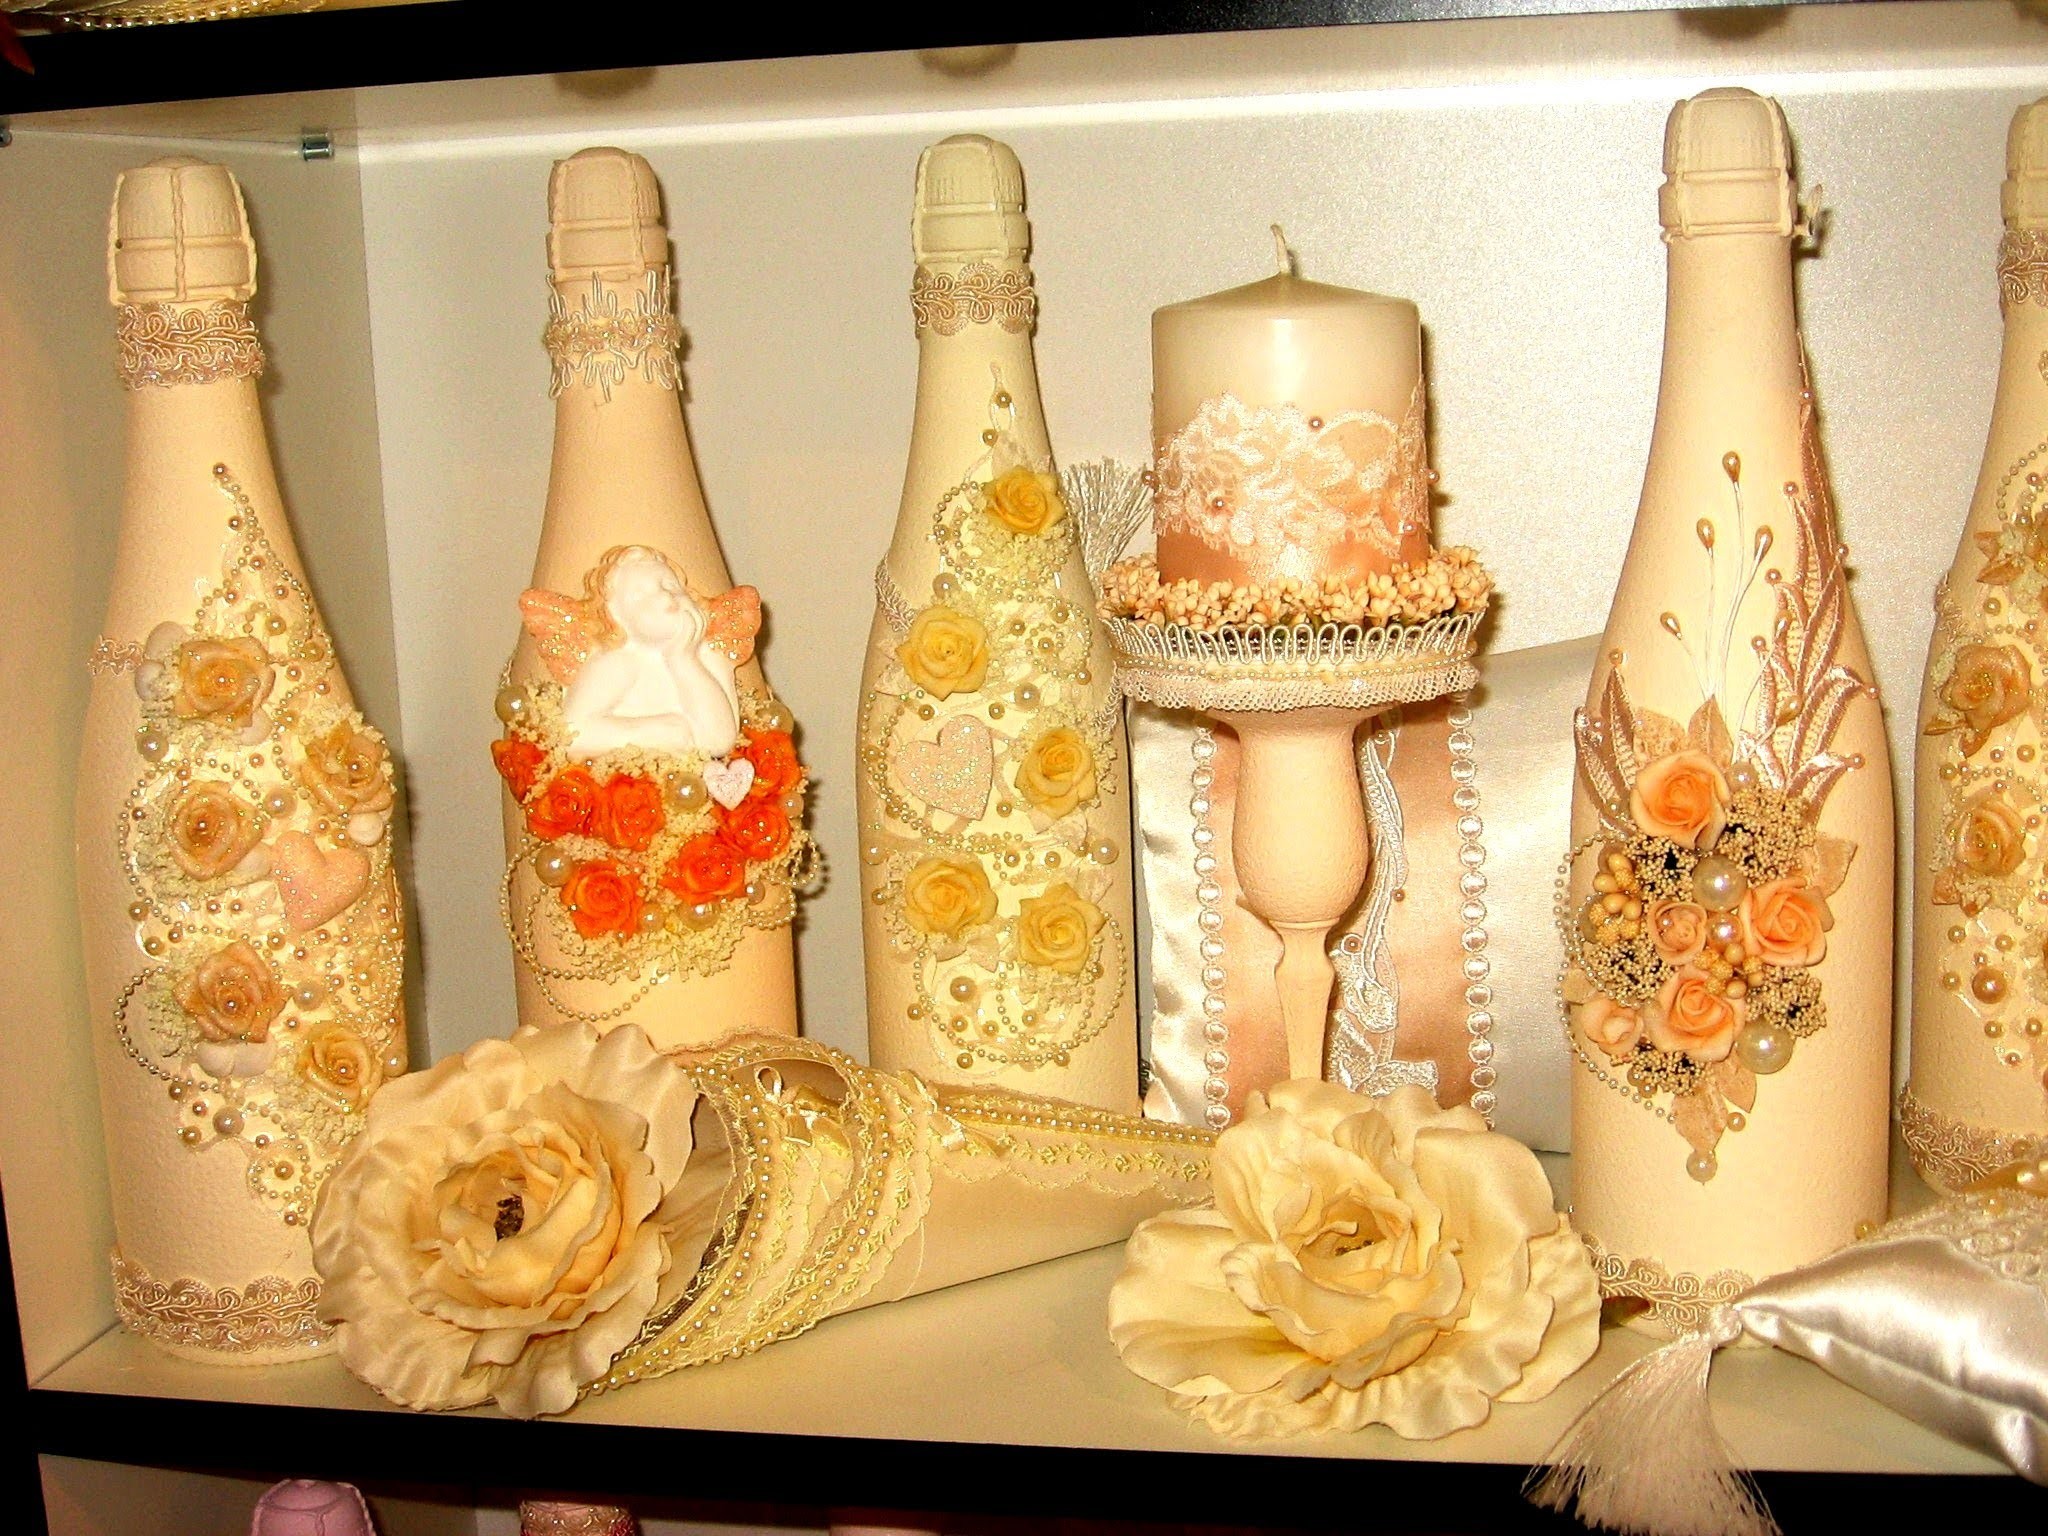 weddings,ideas,How,to,decorate,a,champagne,bottle,for,weddings,Many,ideas,t...